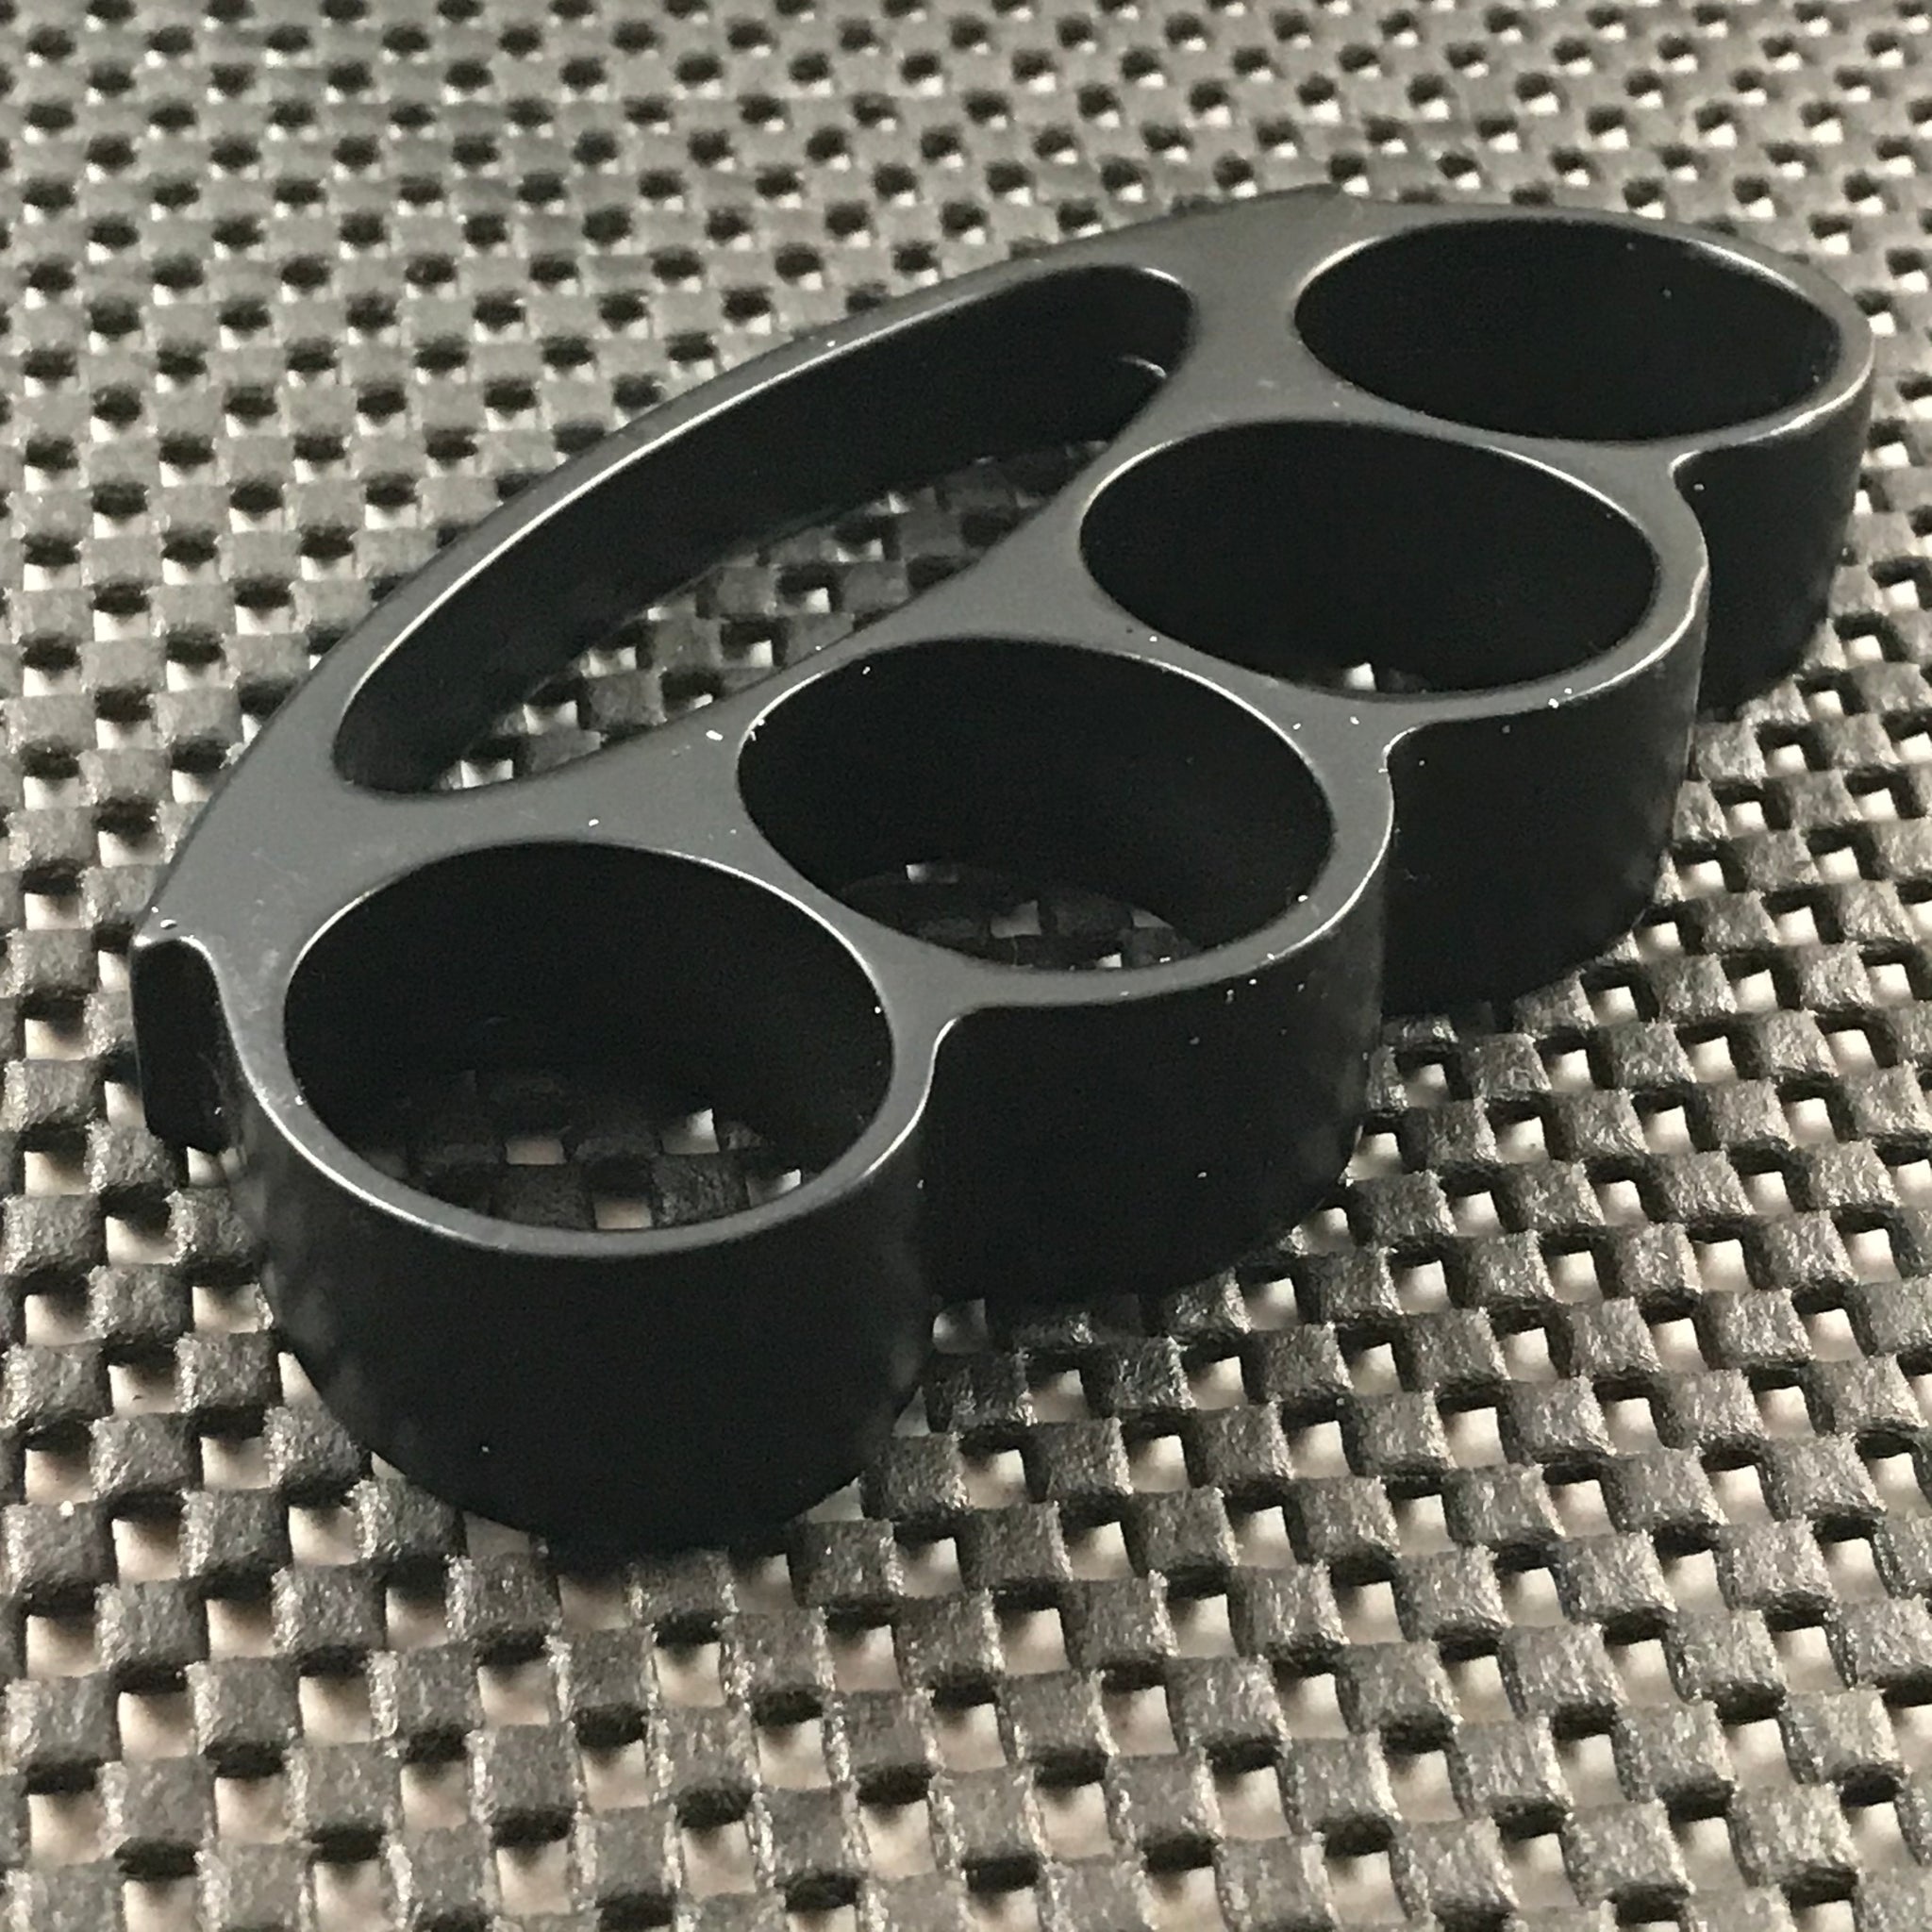 Brass knuckles for defense - Wicked Store